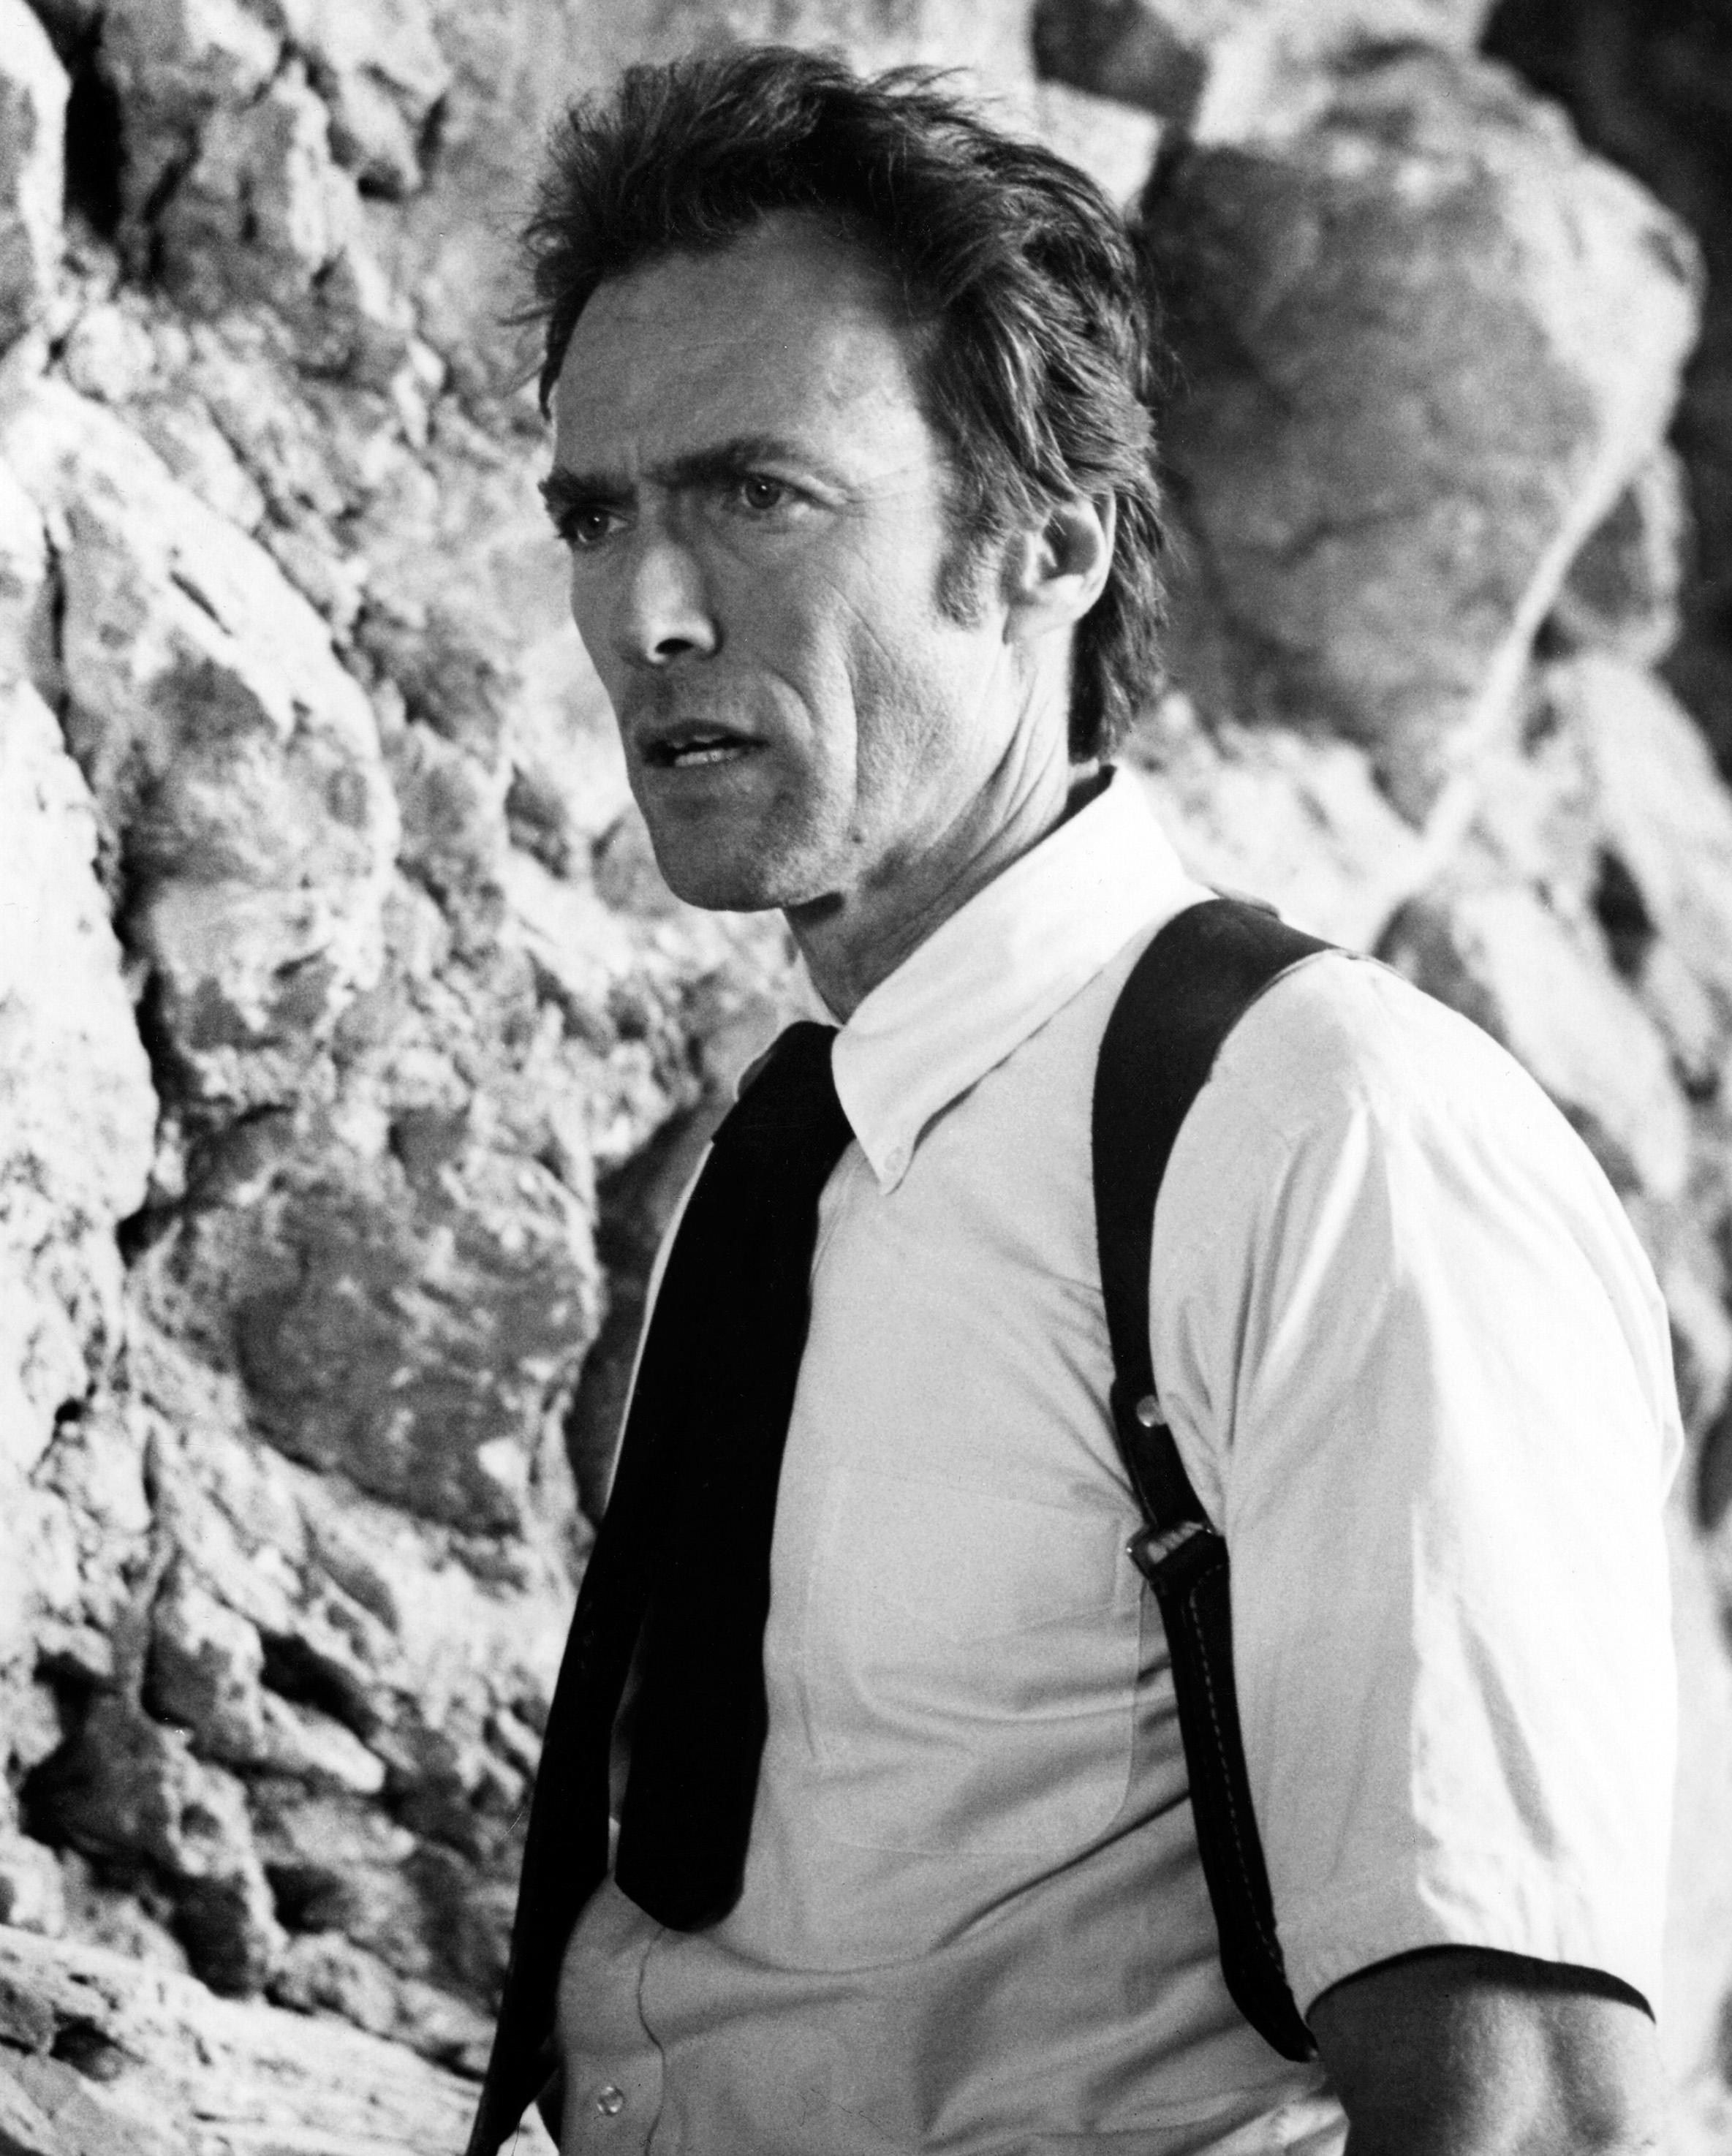 Unknown Black and White Photograph - Clint Eastwood in "The Gauntlet" Globe Photos Fine Art Print